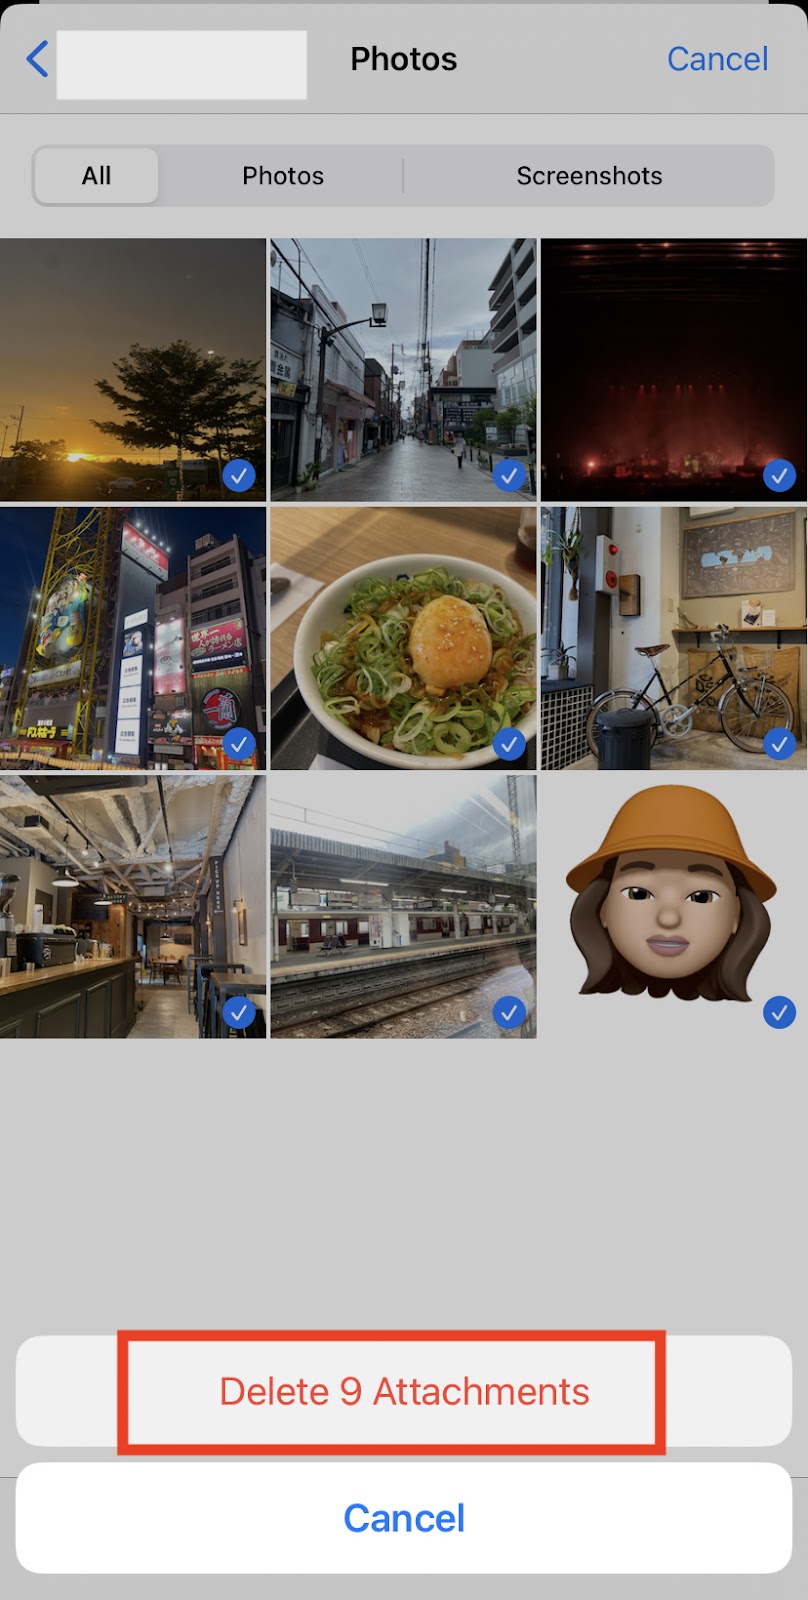 selecting all the photos to delete attachments